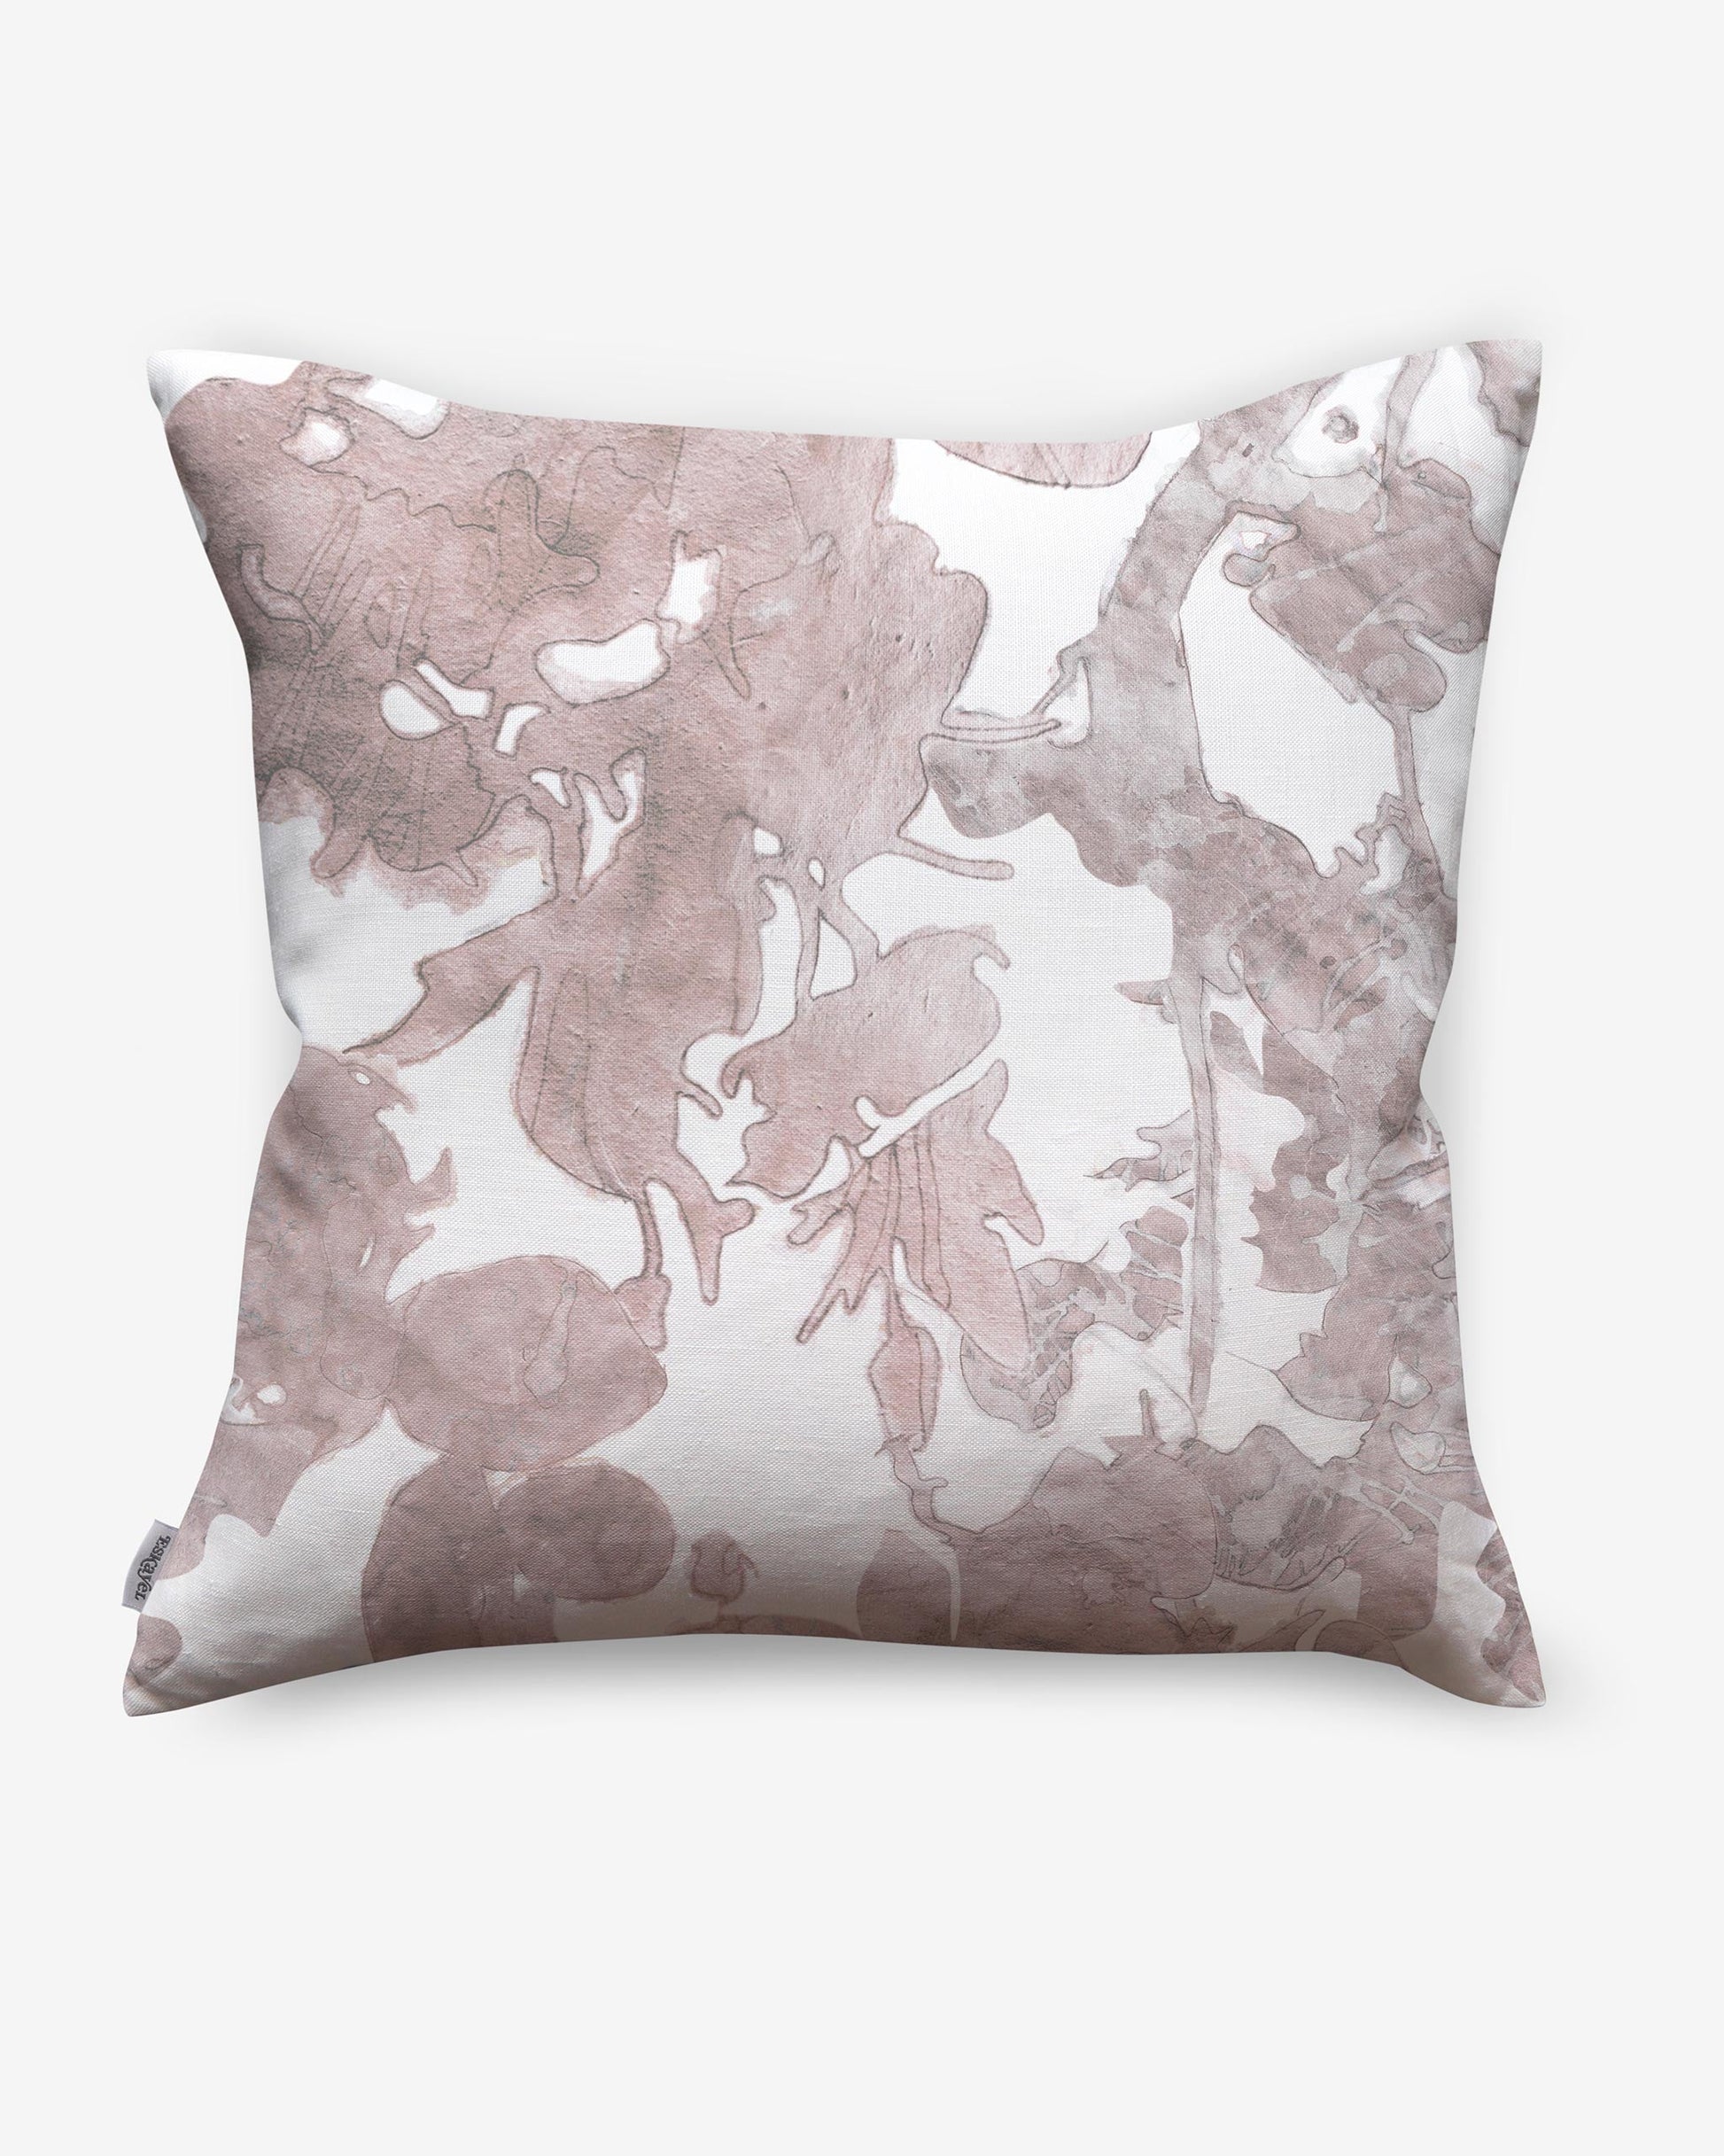 An Up For Anything Pillow||Glimmer with a pink and white botanical pattern.